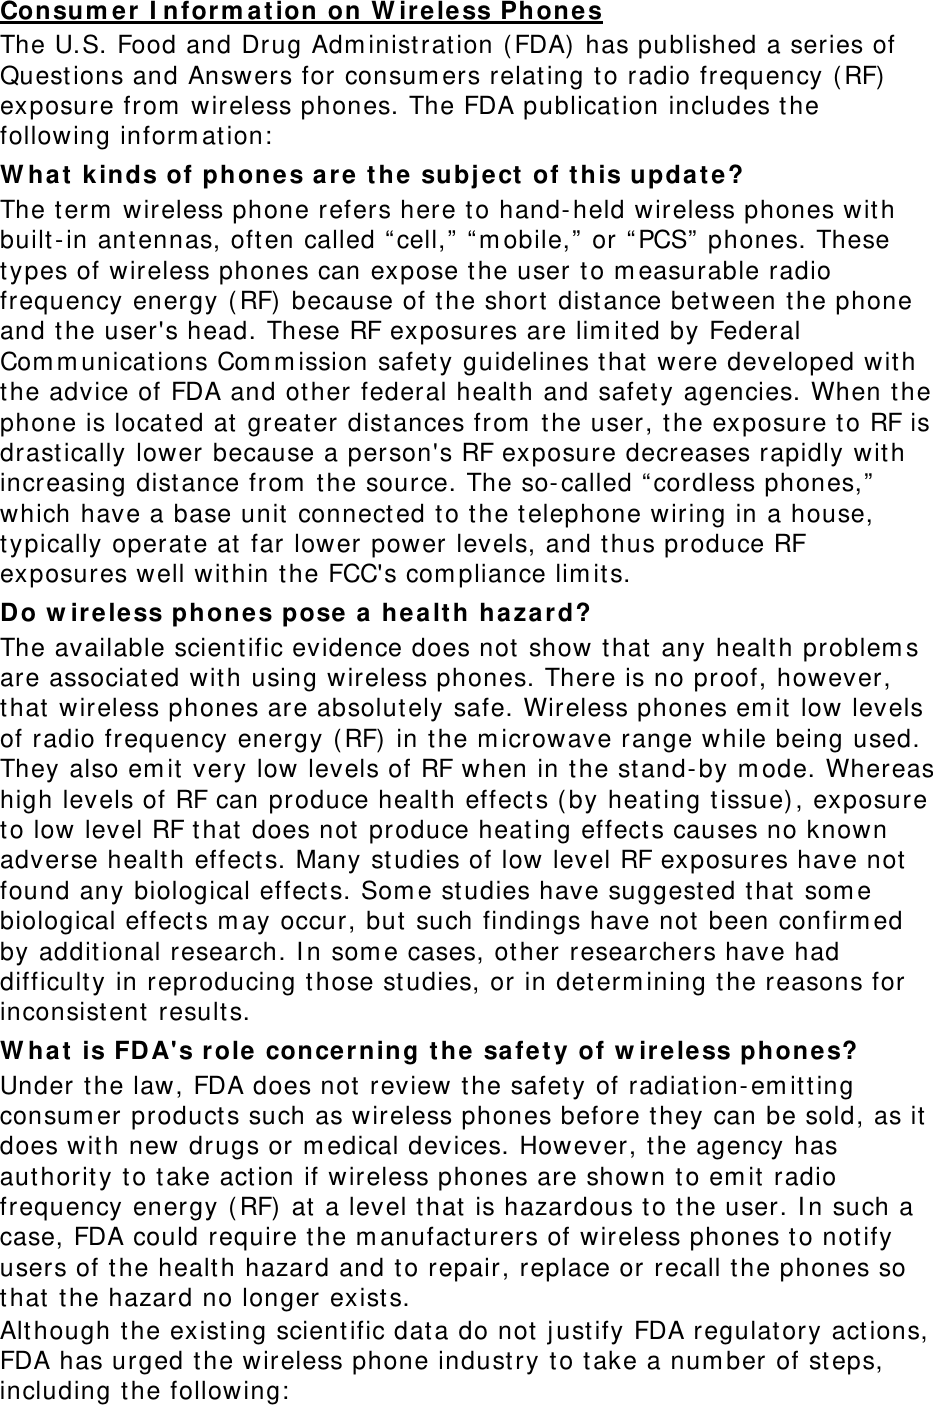 Consum er I nfor m at ion on W irele ss Phones The U.S. Food and Drug Adm inistrat ion ( FDA)  has published a series of Quest ions and Answers for consum ers relat ing t o radio frequency ( RF)  exposure from  wireless phones. The FDA publicat ion includes t he following inform at ion:  W hat  k inds of phones a r e  t he  subj e ct  of t his upda te? The t erm  wireless phone refers here t o hand- held wireless phones wit h built- in ant ennas, often called “ cell,”  “ m obile,”  or “ PCS”  phones. These types of wireless phones can expose t he user t o m easurable radio frequency energy ( RF) because of t he short  dist ance between the phone and t he user&apos;s head. These RF exposures are lim ited by Federal Com m unications Com m ission safet y guidelines t hat  were developed wit h the advice of FDA and ot her federal healt h and safet y agencies. When t he phone is locat ed at  great er dist ances from  t he user, the exposure t o RF is drast ically lower because a person&apos;s RF exposure decreases rapidly wit h increasing distance from  t he source. The so- called “ cordless phones,”  which have a base unit connect ed to t he t elephone wiring in a house, typically operat e at  far lower power levels, and t hus produce RF exposures well wit hin t he FCC&apos;s com pliance lim it s. Do w ireless phones pose  a  healt h ha zard? The available scient ific evidence does not  show t hat  any healt h problem s are associat ed wit h using wireless phones. There is no proof, however, that  wireless phones are absolutely safe. Wireless phones em it  low levels of radio frequency energy ( RF) in t he m icrowave range while being used. They also em it very low levels of RF when in the st and- by m ode. Whereas high levels of RF can produce healt h effect s ( by heat ing t issue) , exposure to low level RF t hat does not  produce heat ing effect s causes no known adverse healt h effect s. Many st udies of low level RF exposures have not found any biological effect s. Som e st udies have suggest ed t hat  som e biological effect s m ay occur, but such findings have not  been confirm ed by addit ional research. I n som e cases, ot her researchers have had difficulty in reproducing t hose st udies, or in det erm ining t he reasons for inconsist ent result s. W hat  is FD A&apos;s r ole  concerning t he  safe t y of w ir e le ss phones? Under t he law, FDA does not  review t he safet y of radiation- em itt ing consum er product s such as wireless phones before t hey can be sold, as it  does with new drugs or m edical devices. However, t he agency has aut horit y to take act ion if wireless phones are shown to em it  radio frequency energy ( RF) at  a level t hat  is hazardous t o t he user. I n such a case, FDA could require t he m anufact urers of w ireless phones t o not ify users of t he healt h hazard and t o repair, replace or recall t he phones so that  t he hazard no longer exist s. Although t he exist ing scient ific dat a do not  j ust ify FDA regulat ory act ions, FDA has urged t he wireless phone industry to t ake a num ber of steps, including t he following:  